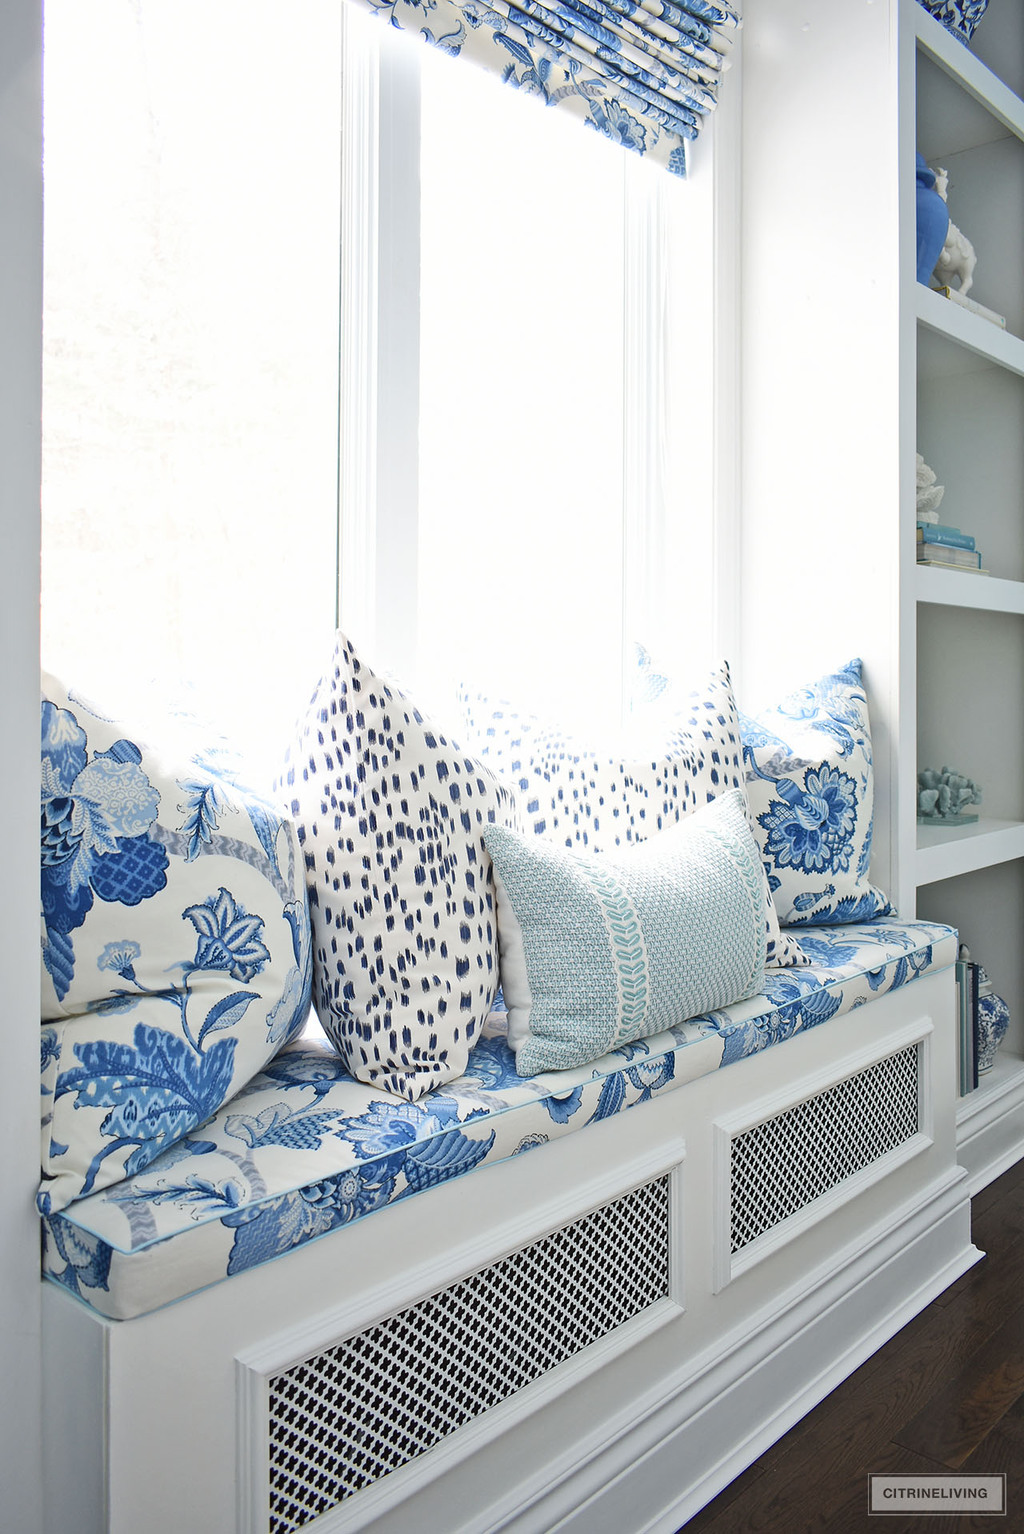 READING NOOK WITH PILLOWS IN ELEGANT HOME OFFICE IN BLUE + WHITE CHINOISERIE